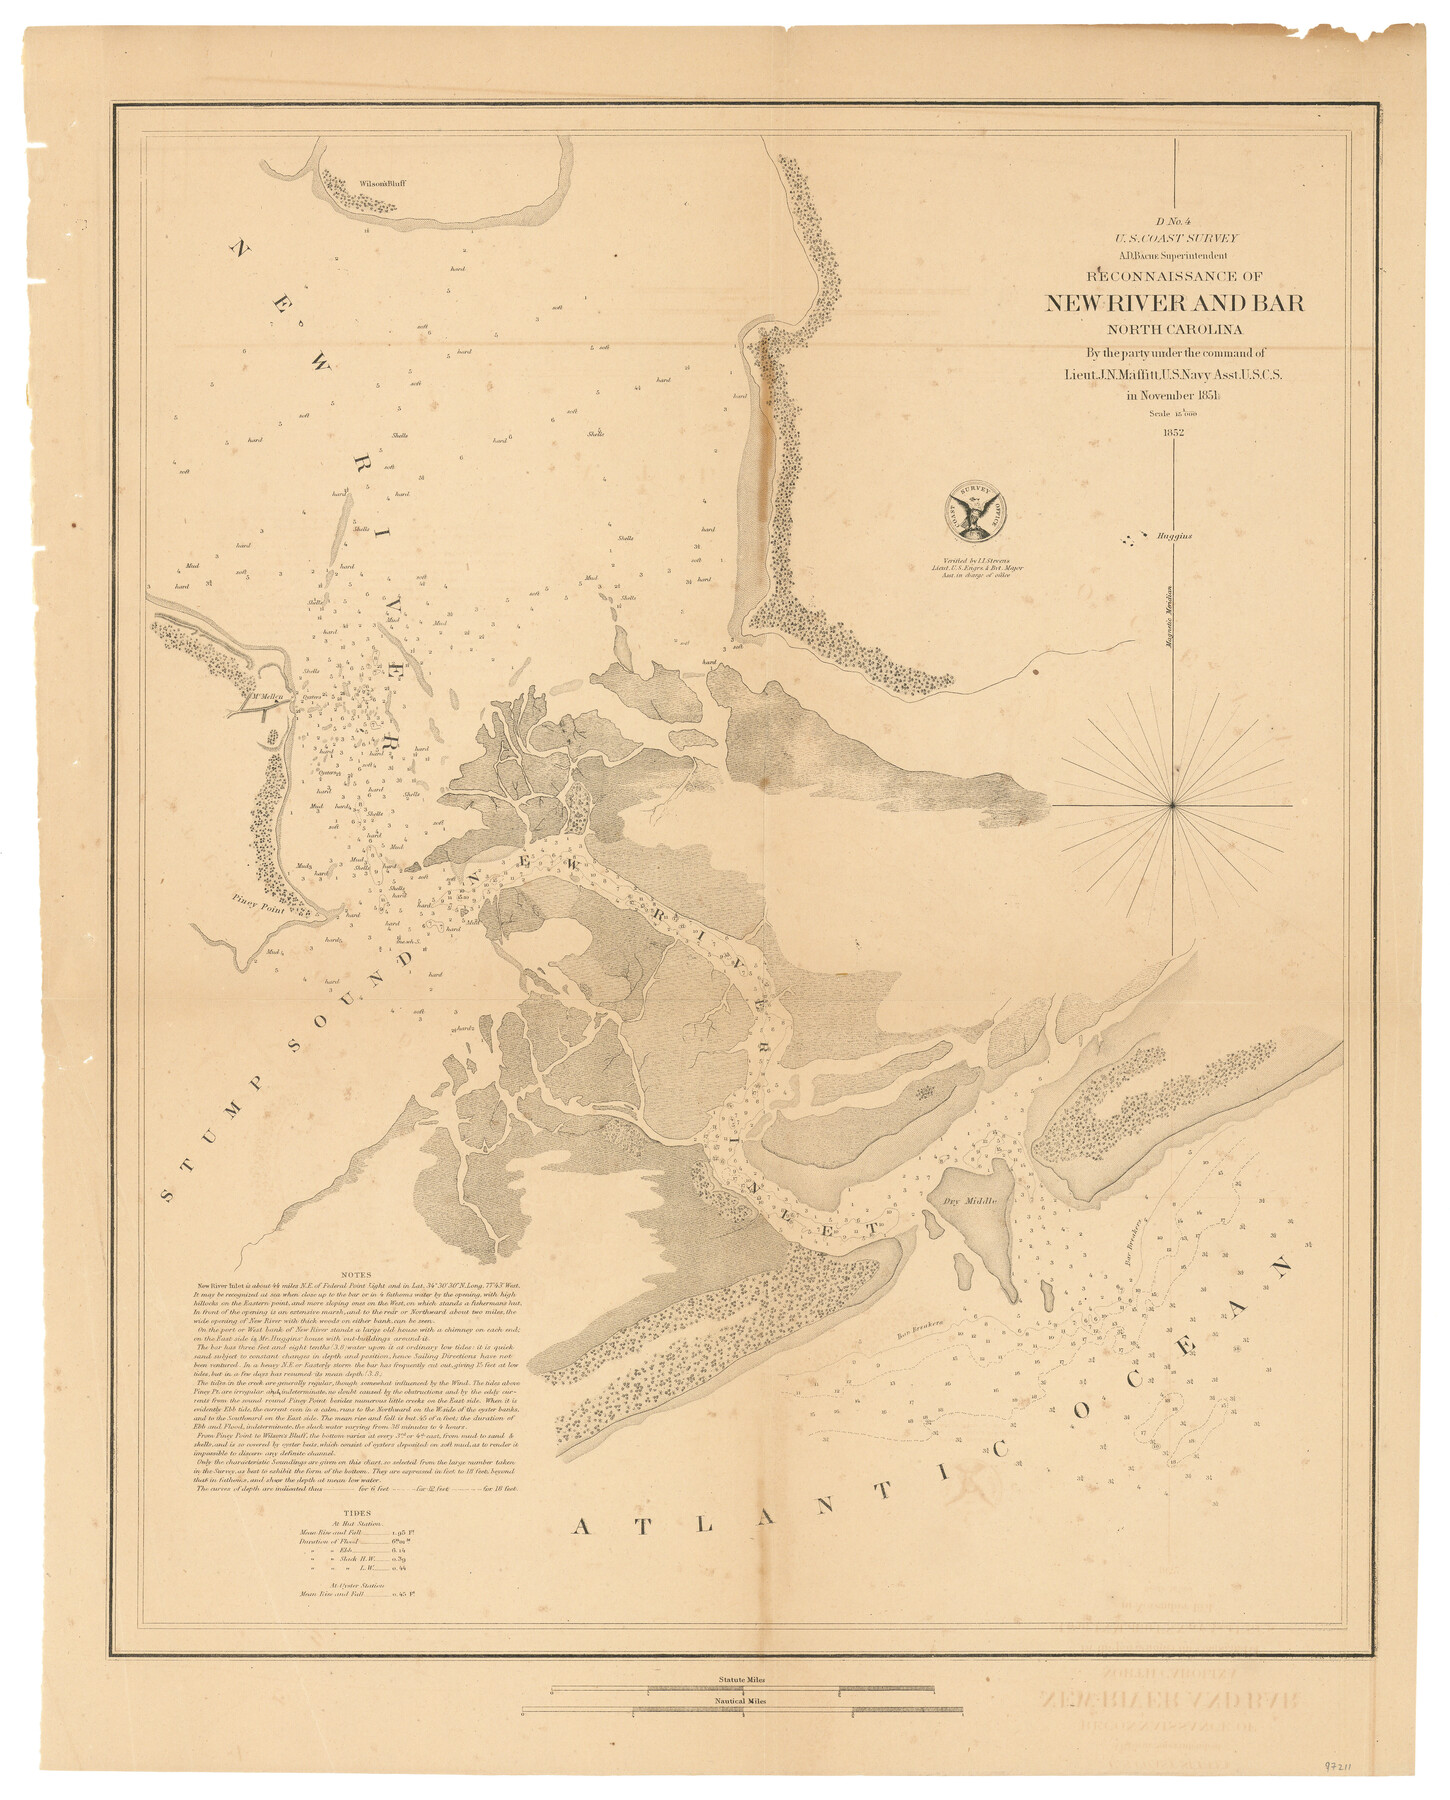 97211, D No. 4 - Reconnaissance of New River and Bar, North Carolina, General Map Collection